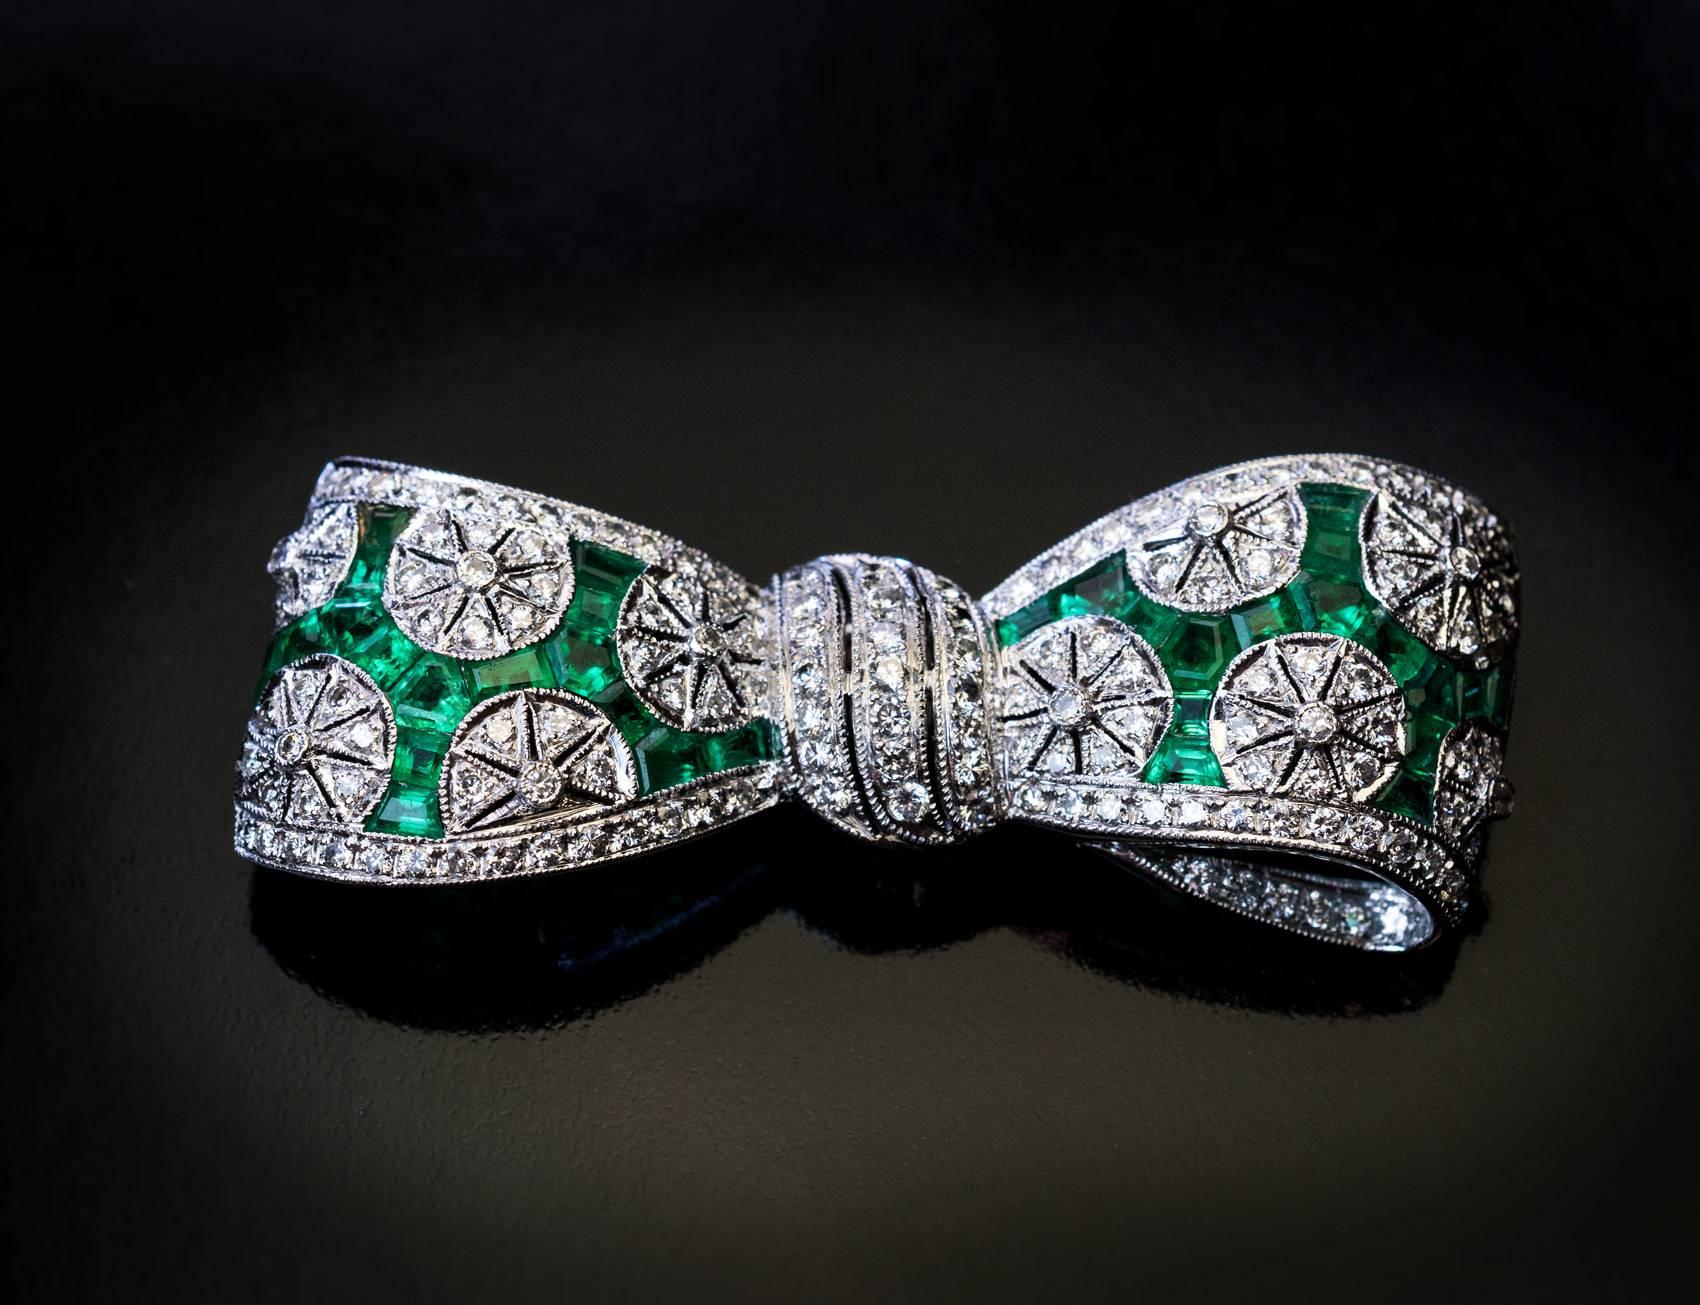 Circa 1930s
A handcrafted bow-shaped platinum brooch / pin is densely set with diamonds and calibre cut vivid green emeralds.
Estimated total diamond weight is 1 carat.
Approximate total emerald weight is 1.30 ct.
Width 46 mm (1 13/16